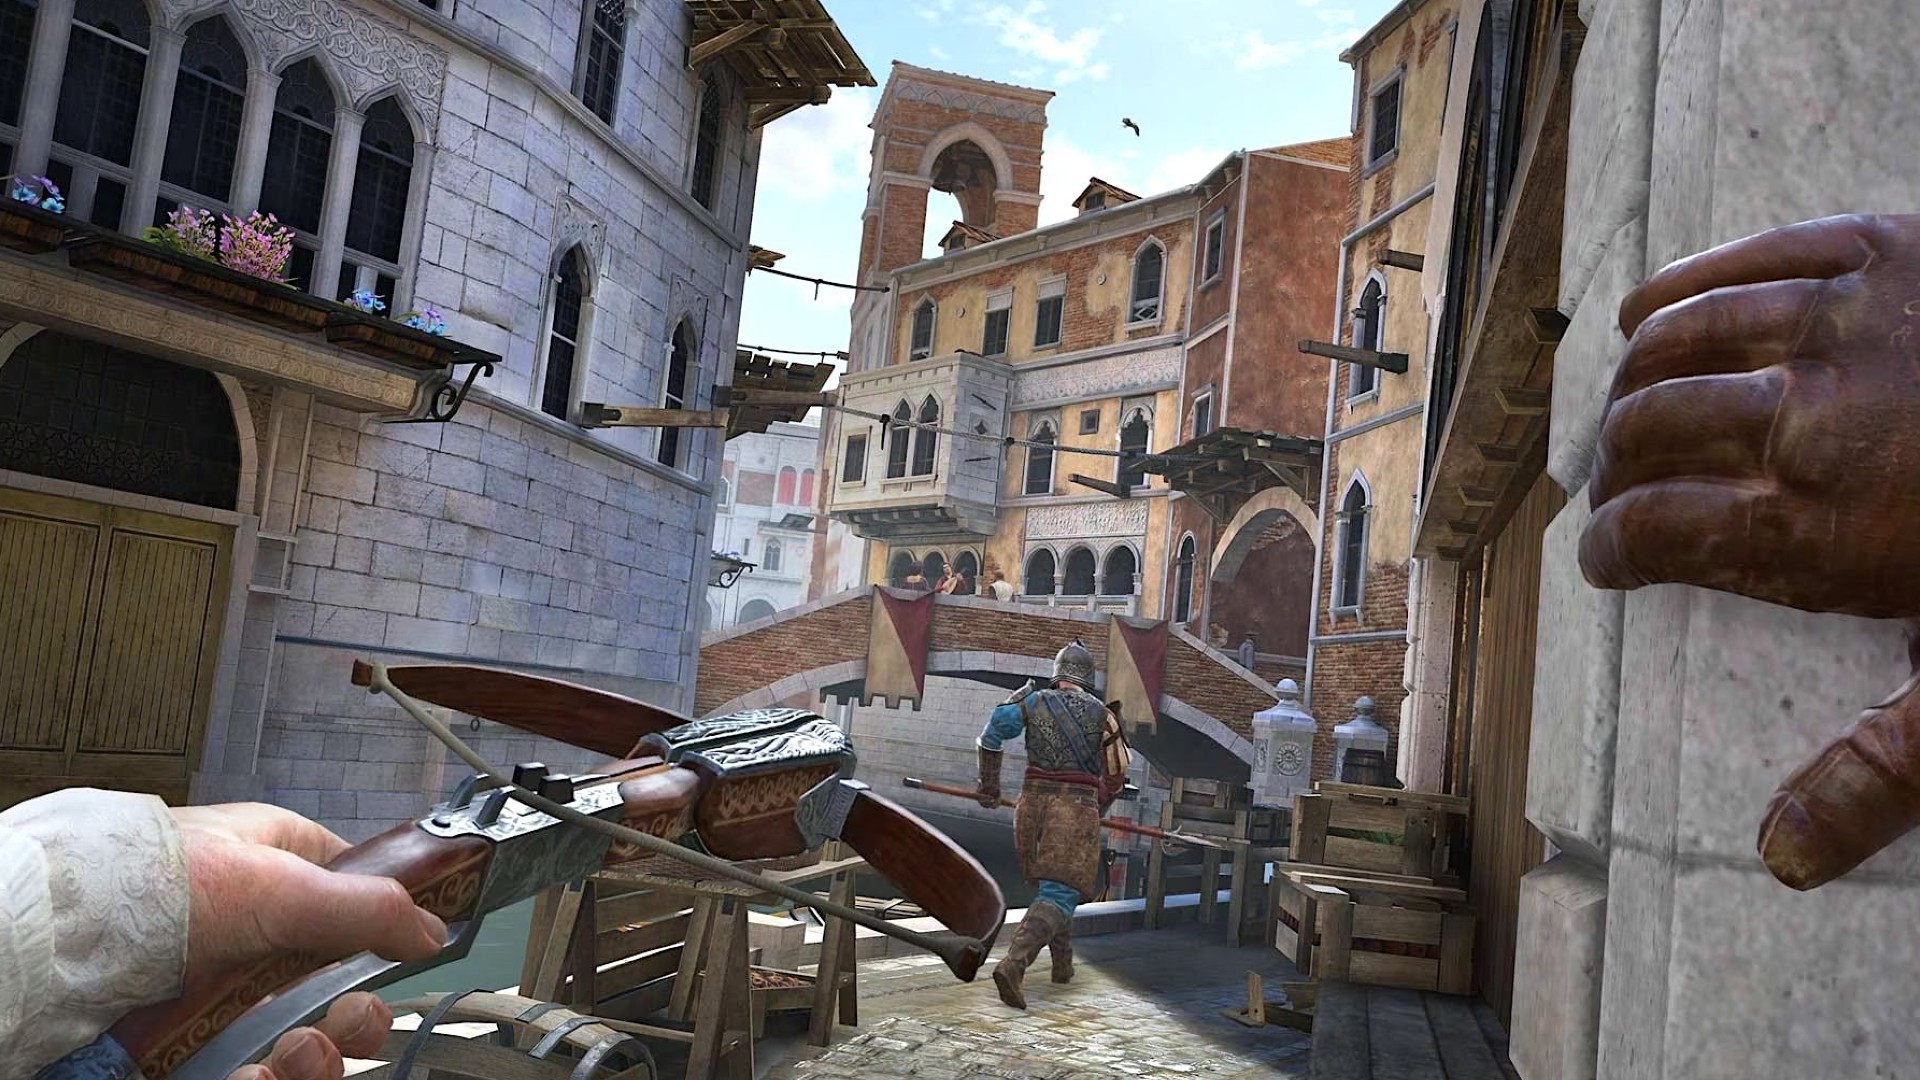 Assassin's Creed 2 - All Side Activities & Collectibles in Venice